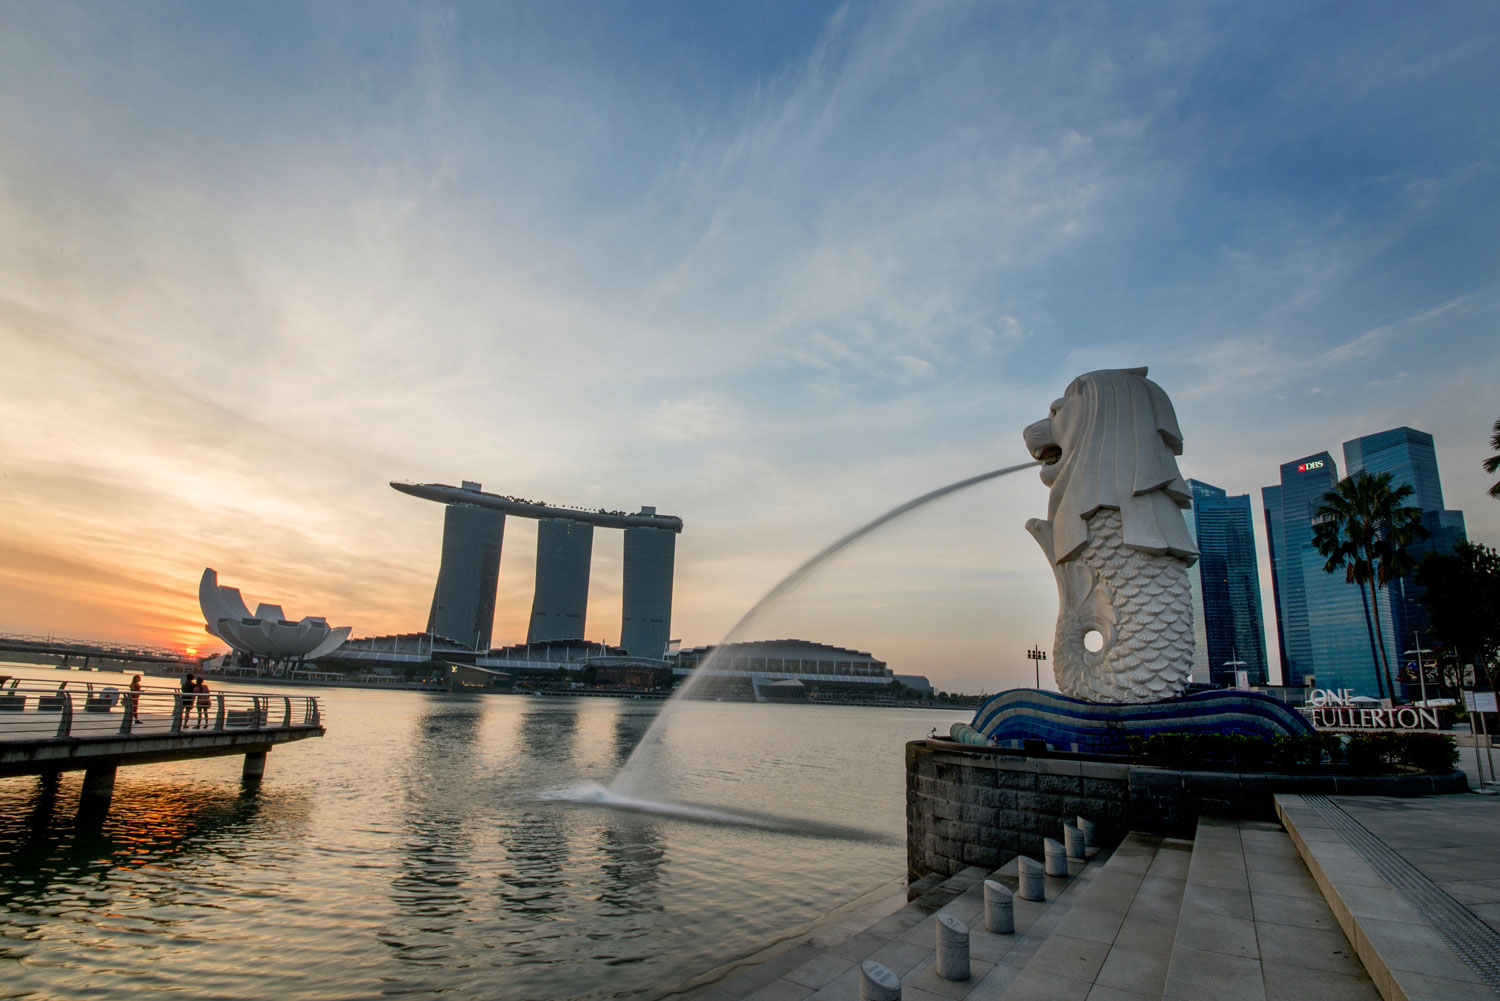 Singapore’s tourism sector remained resilient in 2021, ready for recovery in 2022 and beyond